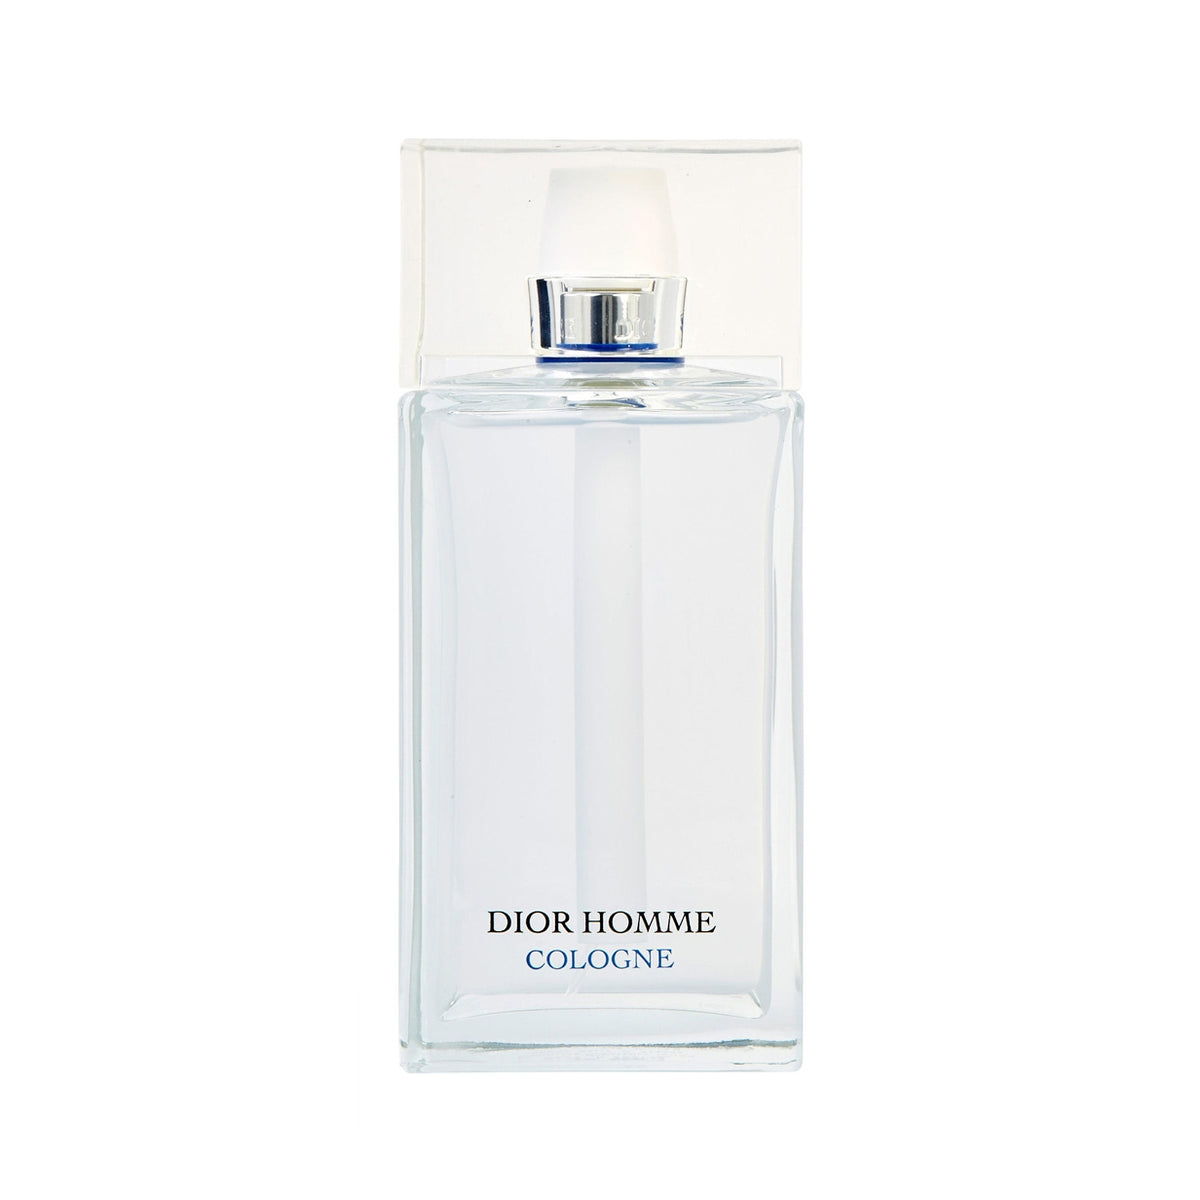 Homme Intense by Dior Fragrance Samples, DecantX